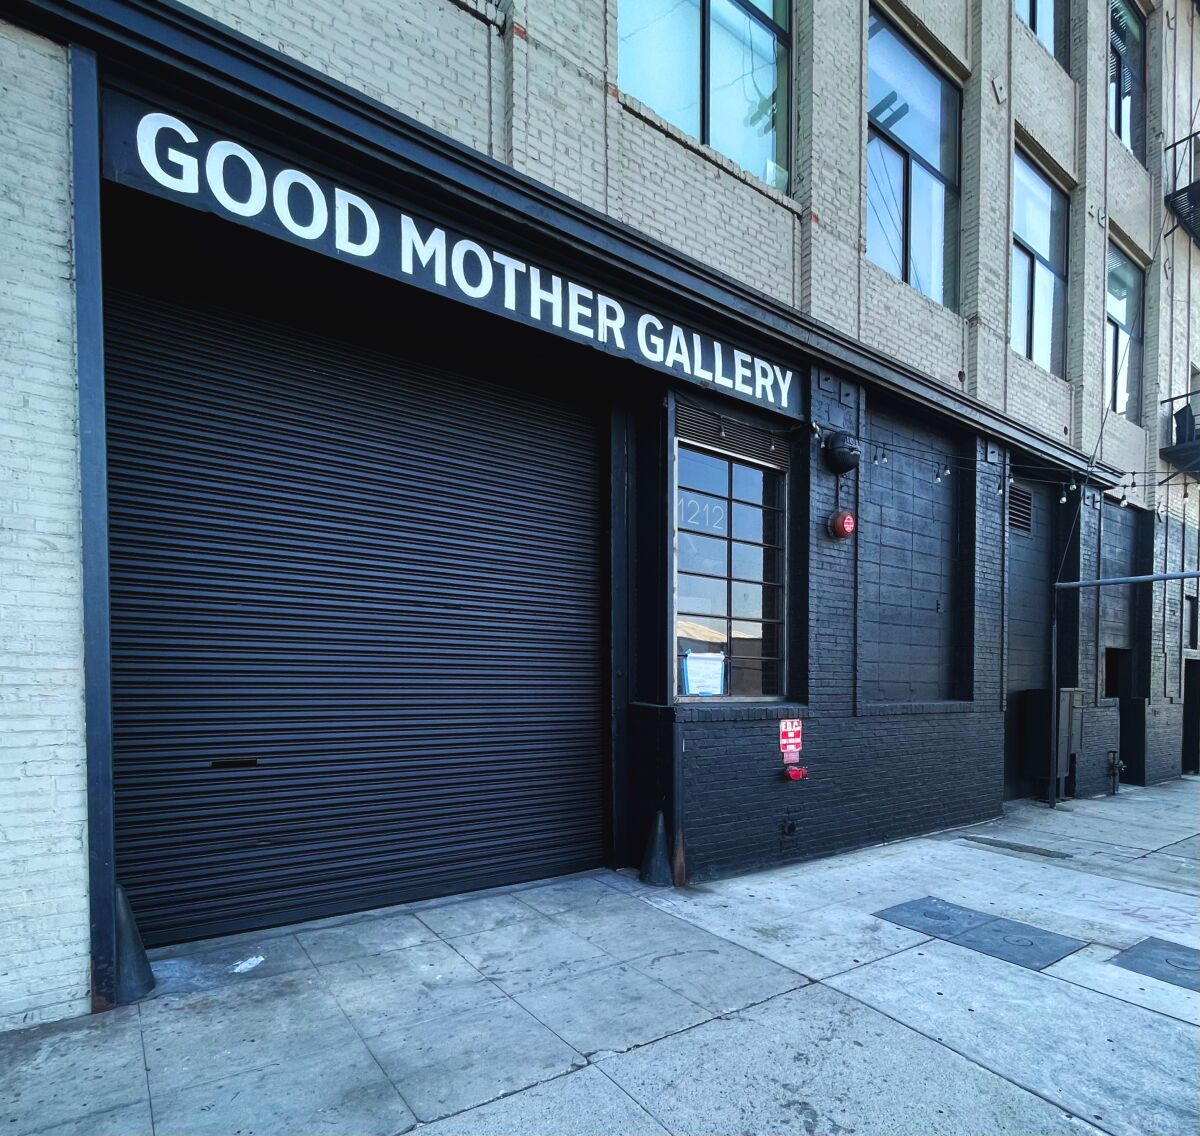 The exterior facade of a building features the title Good Mother Gallery